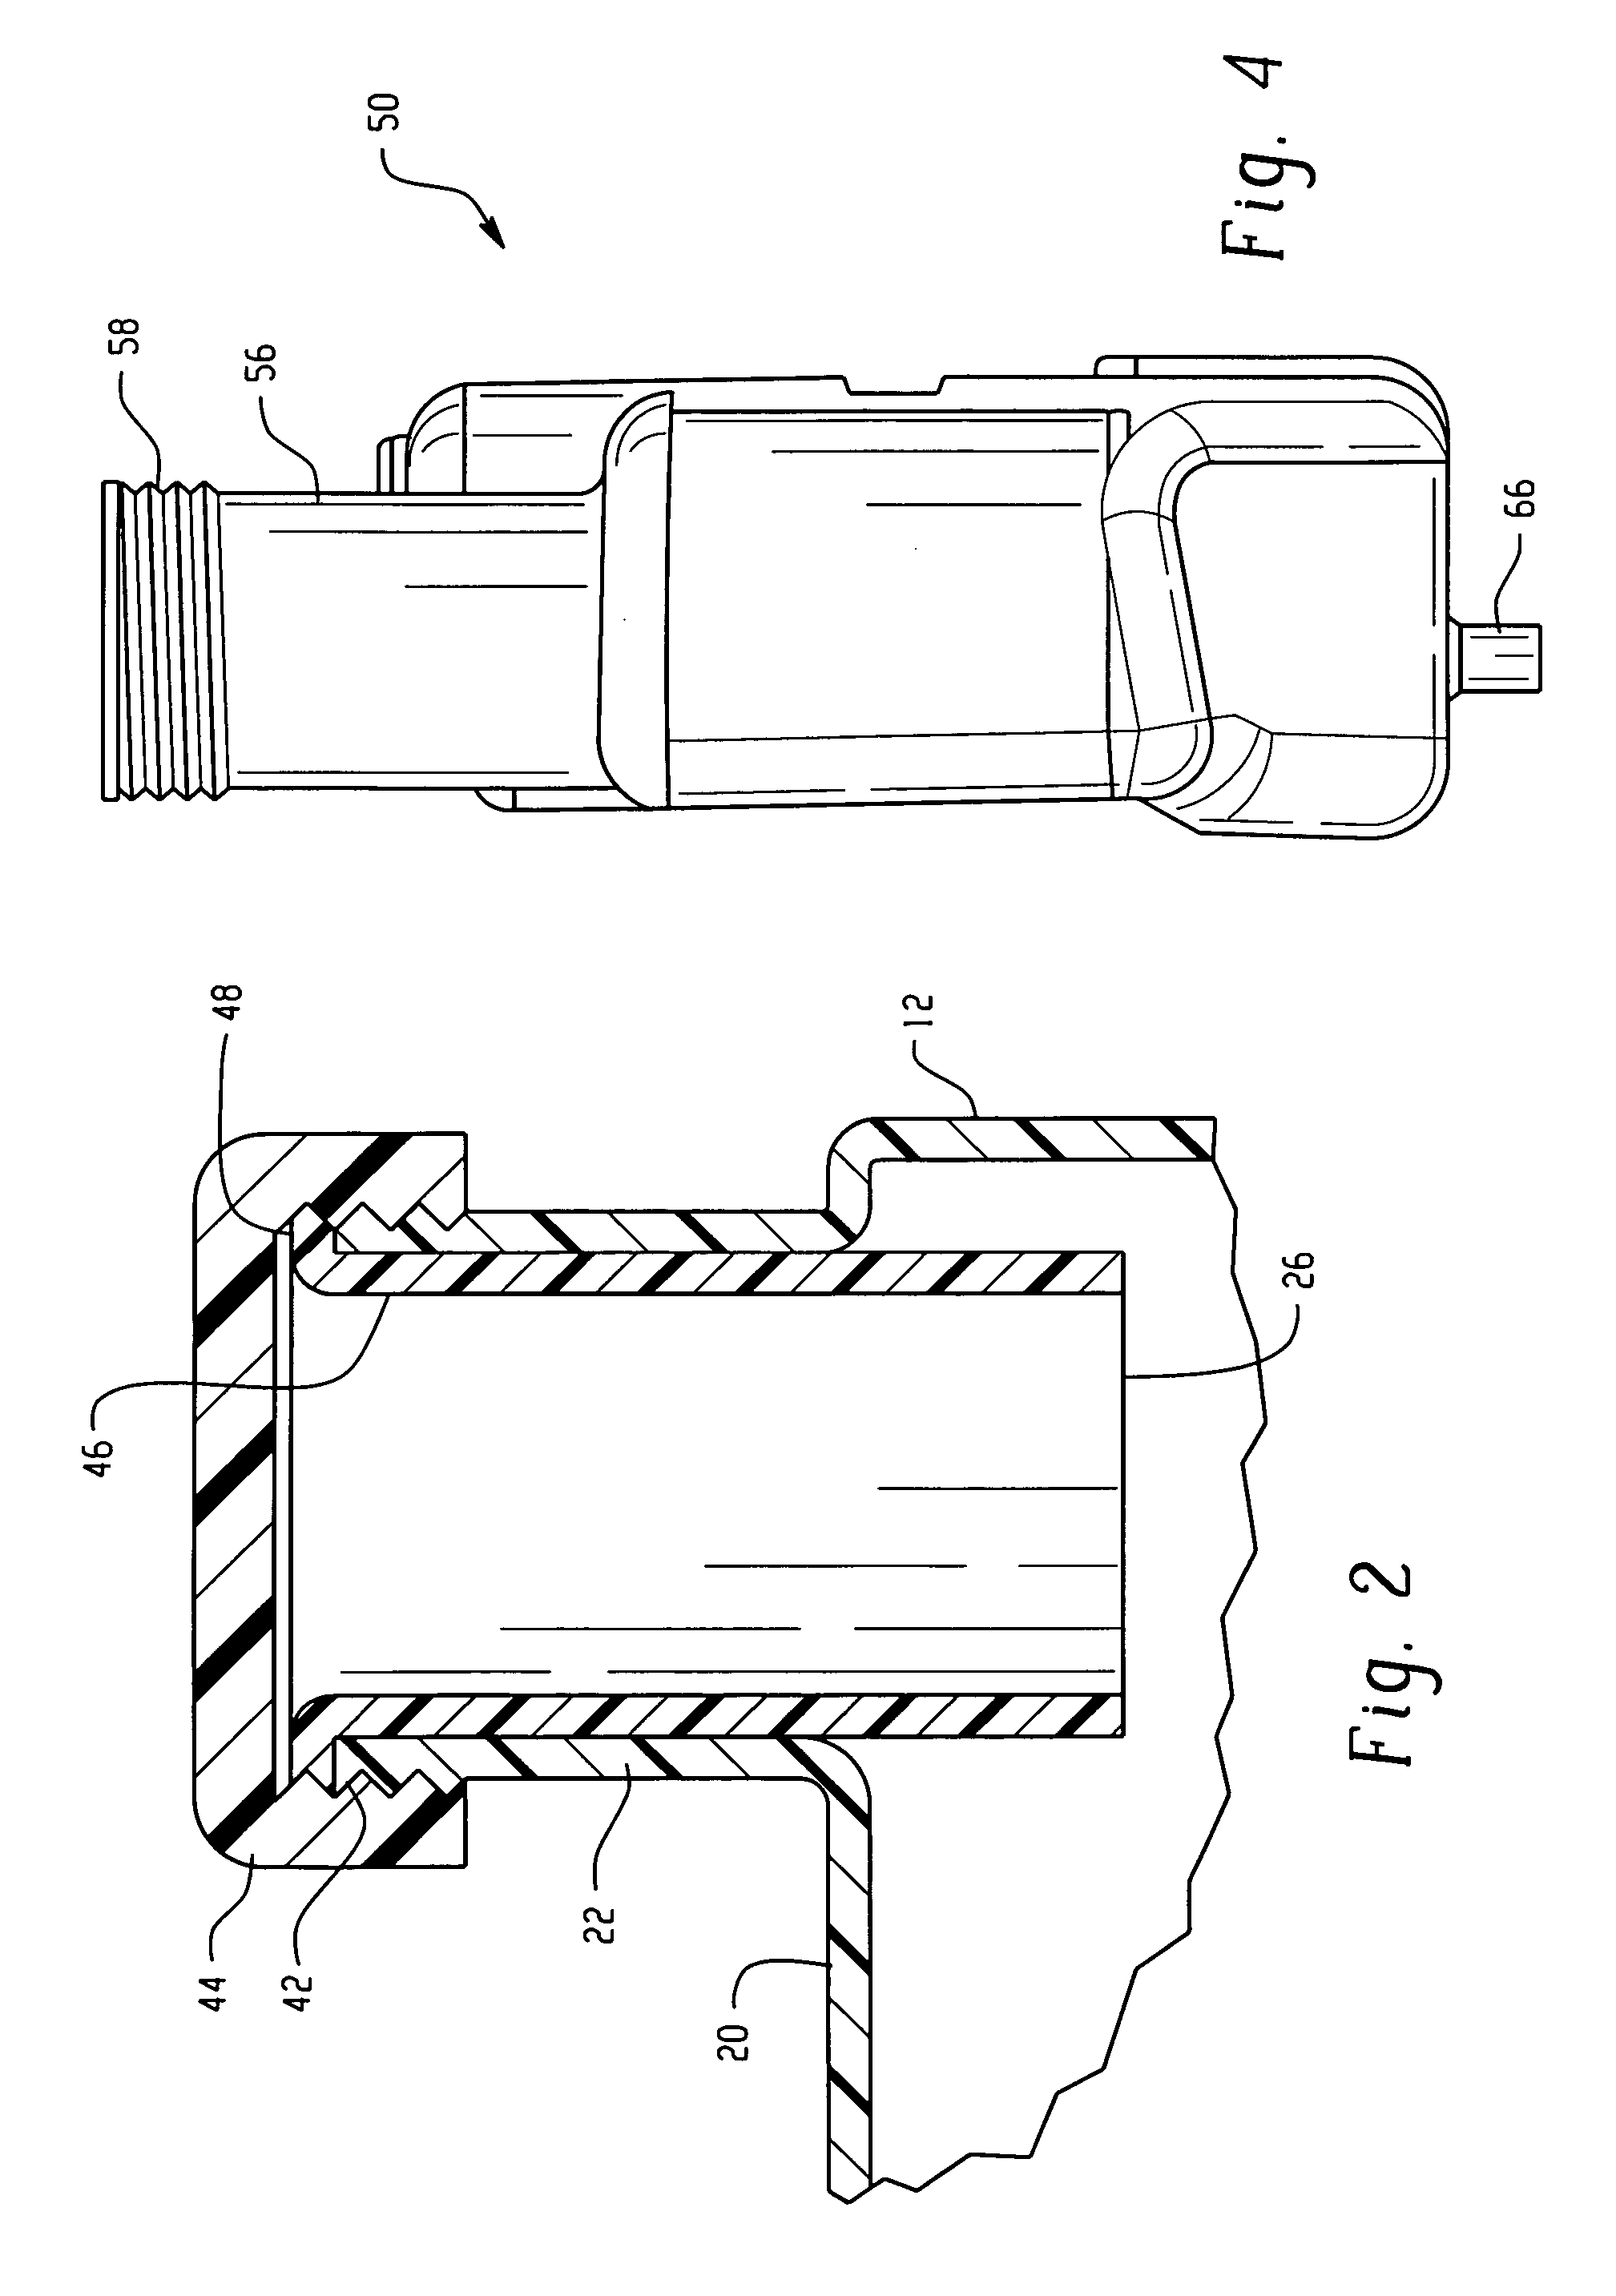 System and method for controlling fuel vapor emission in a small engine